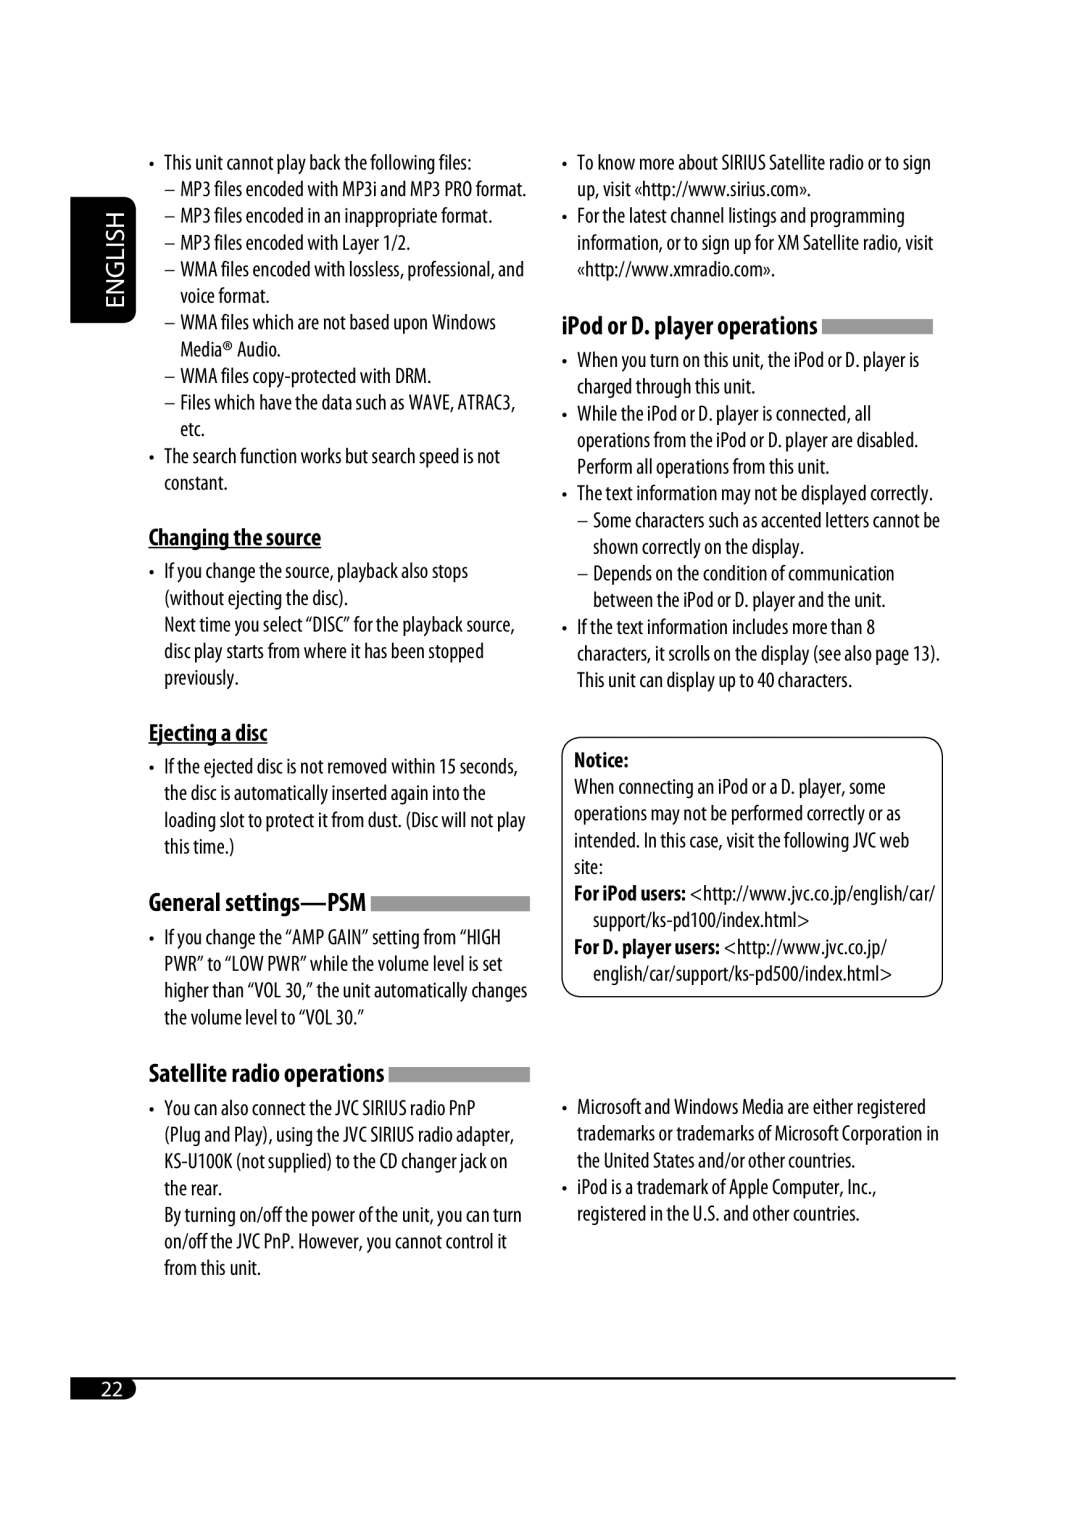 JVC KD-S33 manual Changing the source, Ejecting a disc, iPod or D. player operations, General settings—PSM, Notice, English 